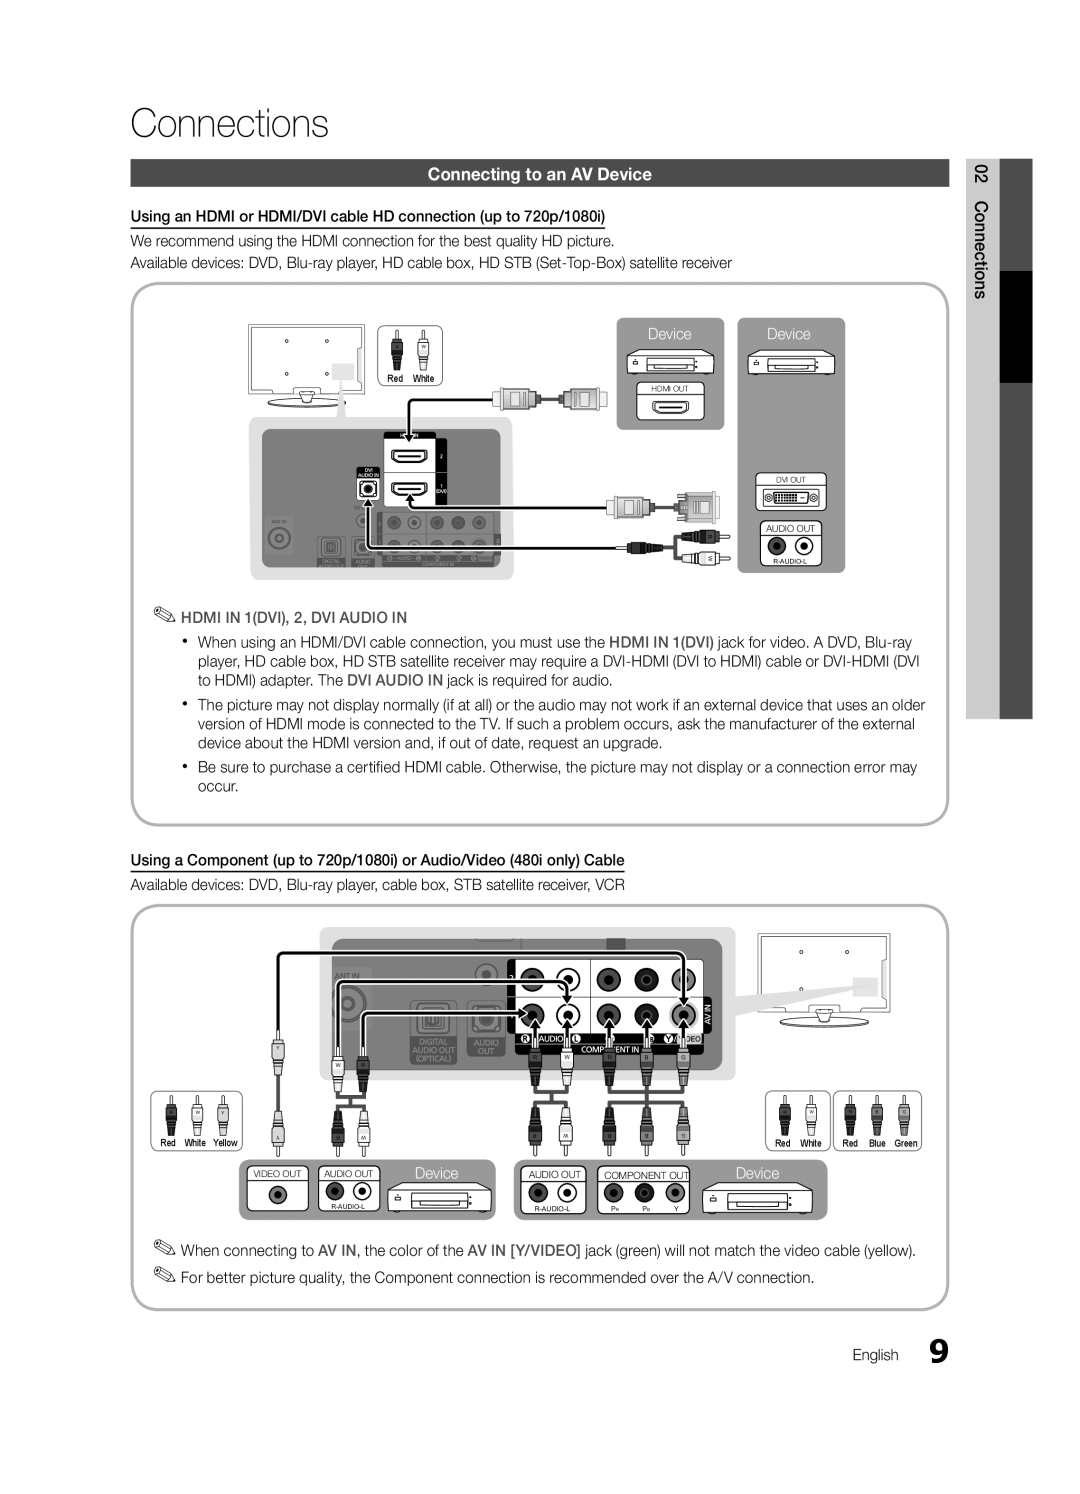 Samsung PC430-ZC, BN68-02576B-06 user manual Connections, Connecting to an AV Device, HDMI IN 1DVI, 2, DVI AUDIO IN 